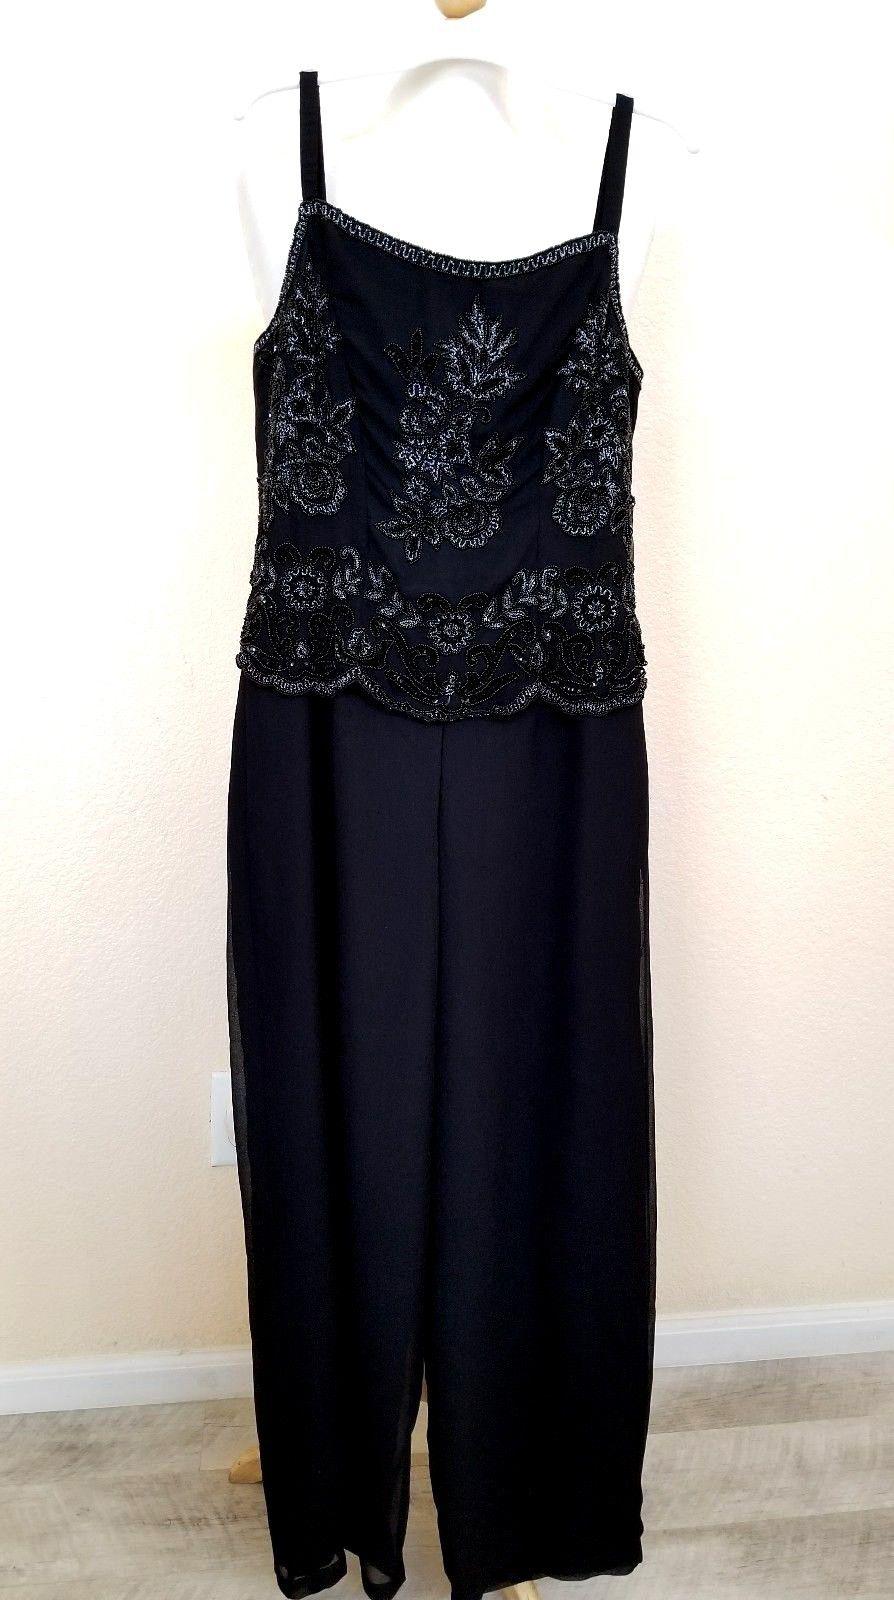 Styleworks Women's Black Romper Jumpsuit Gown size 4 Tiered Beaded: 